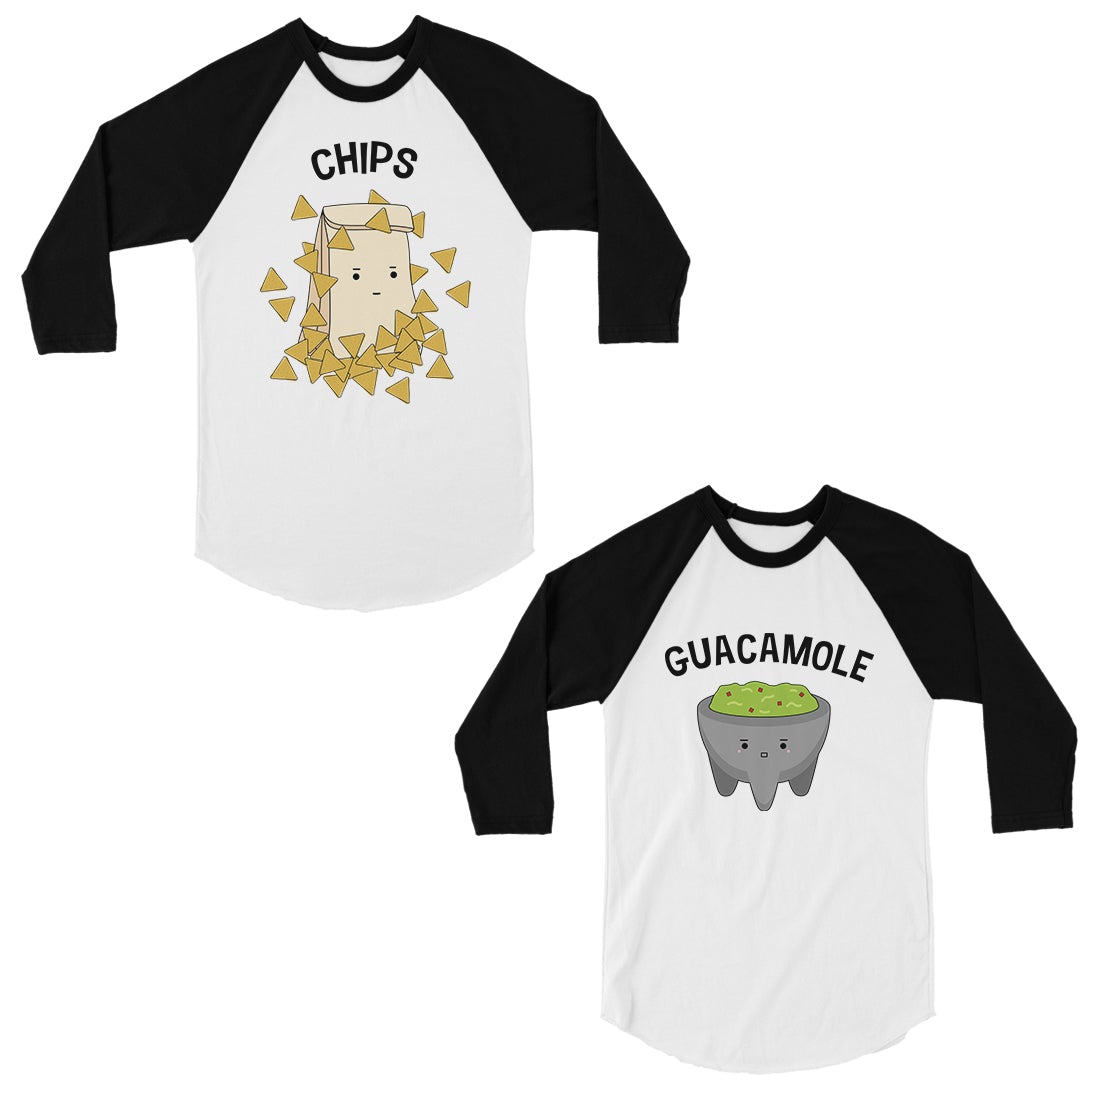 Chips & Guacamole Matching Baseball Shirts Funny Couples Gifts Black and White